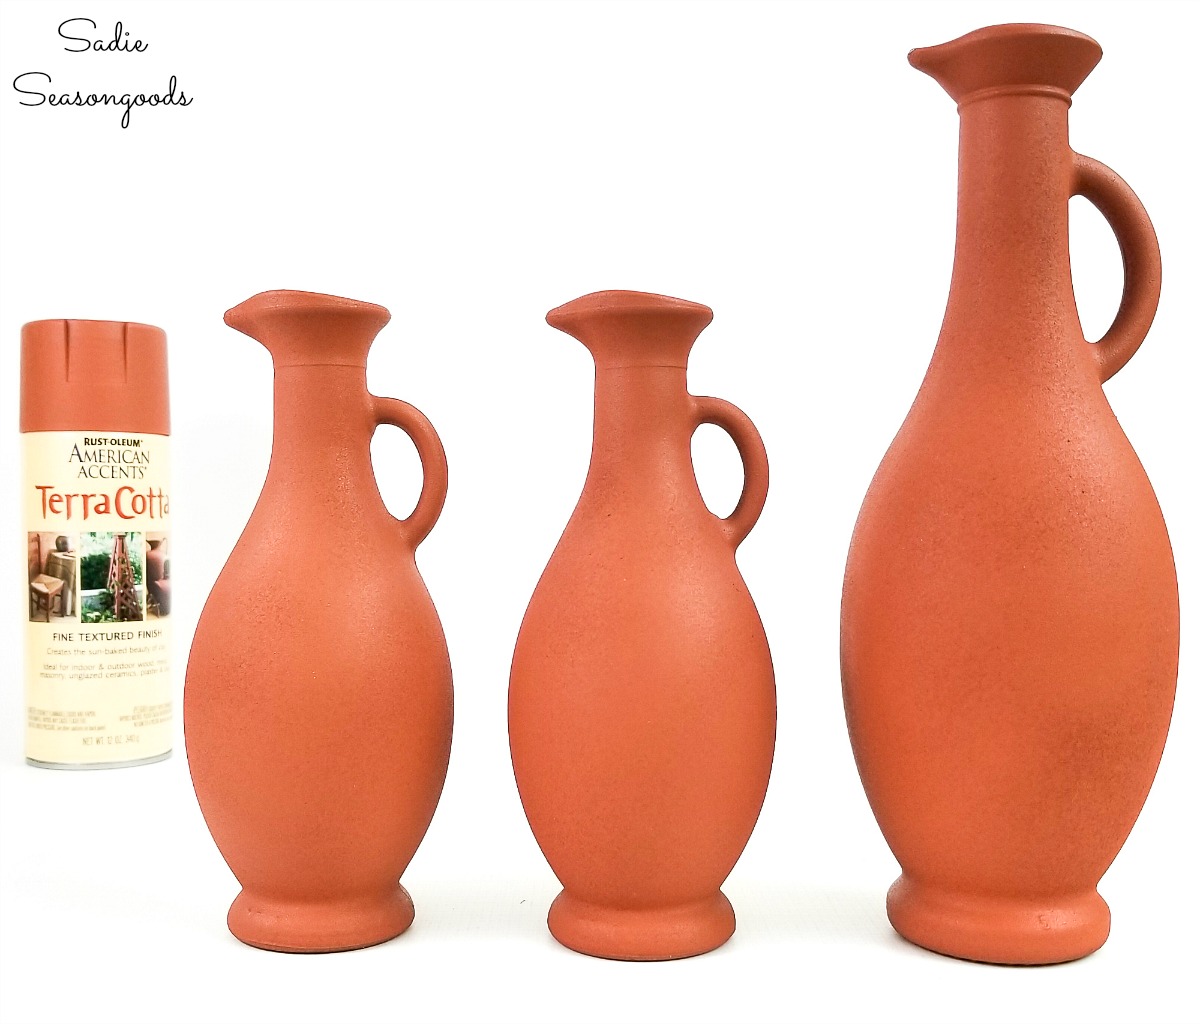 Painting glass with a terracotta paint color for southwestern decor